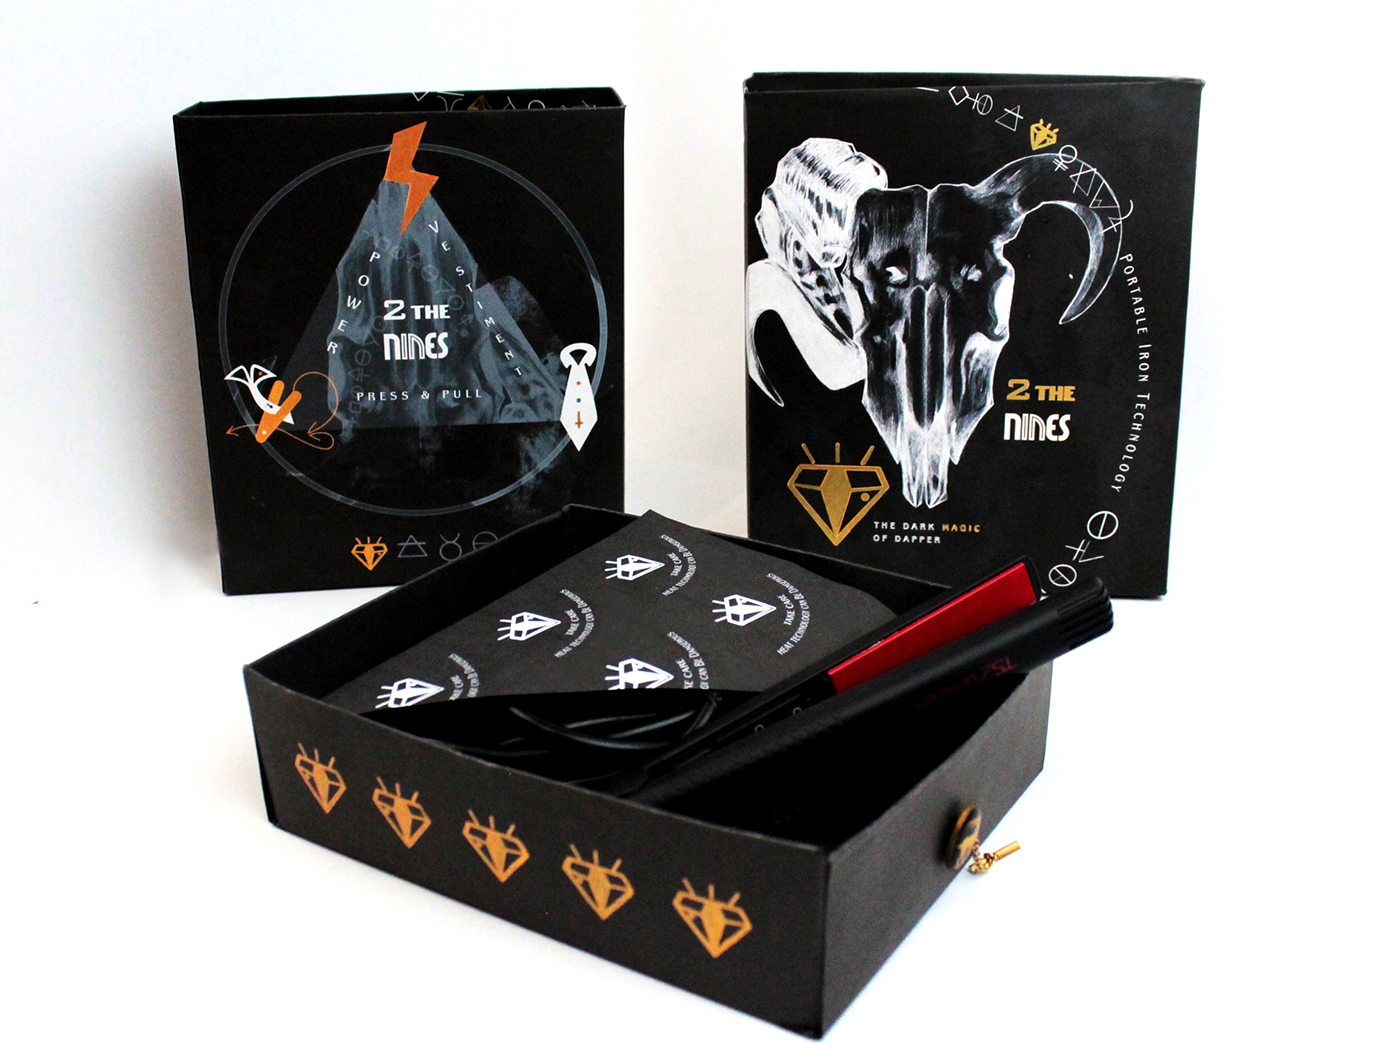 Packaging demonology Student work diamond  Illustration and packaging product Rebrand skull fahion